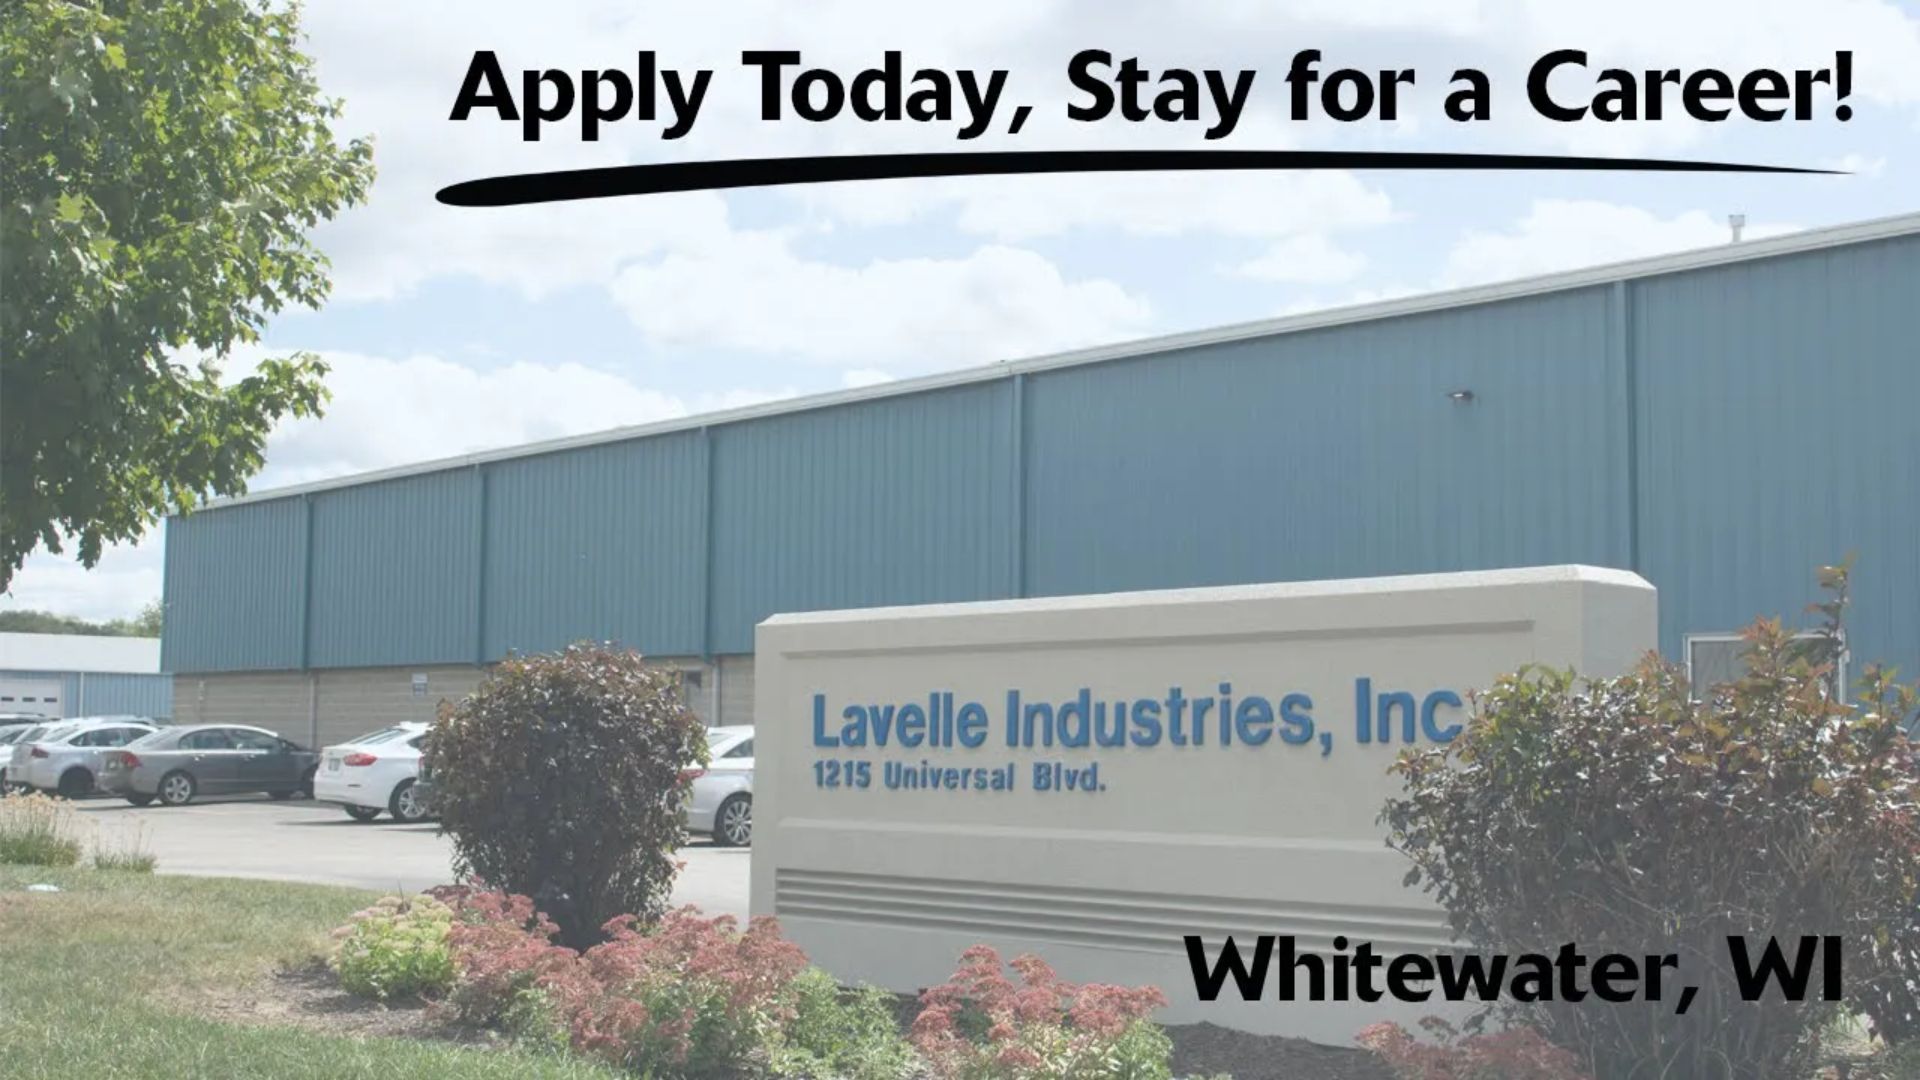 Join the Team - Lavelle Industries, Whitewater, WI